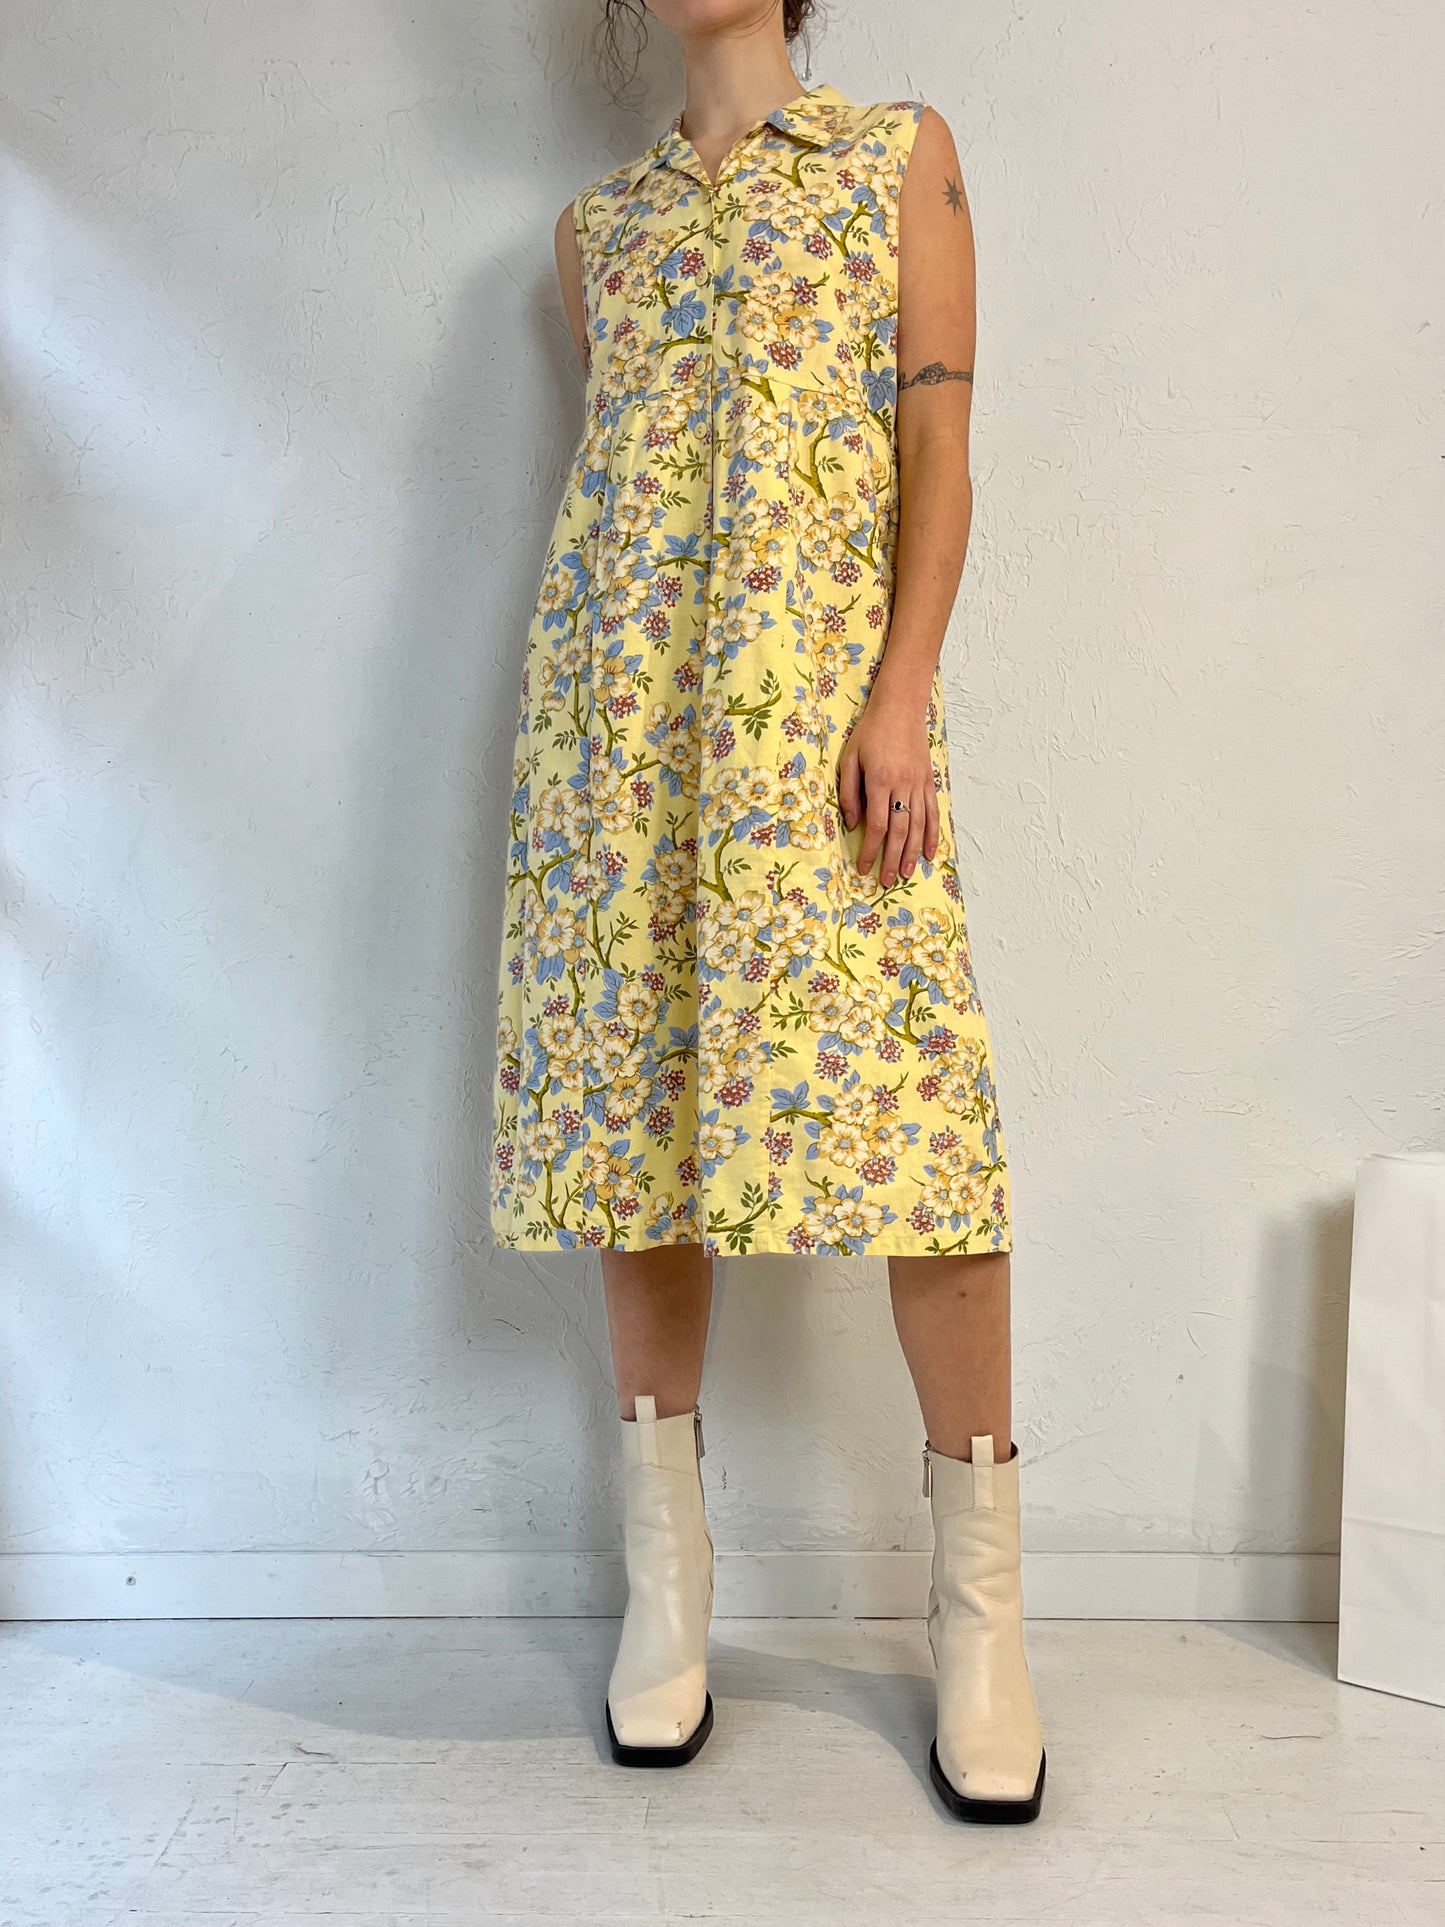 90s 'April Cornell' Yellow Floral Print Cotton Dress / Small